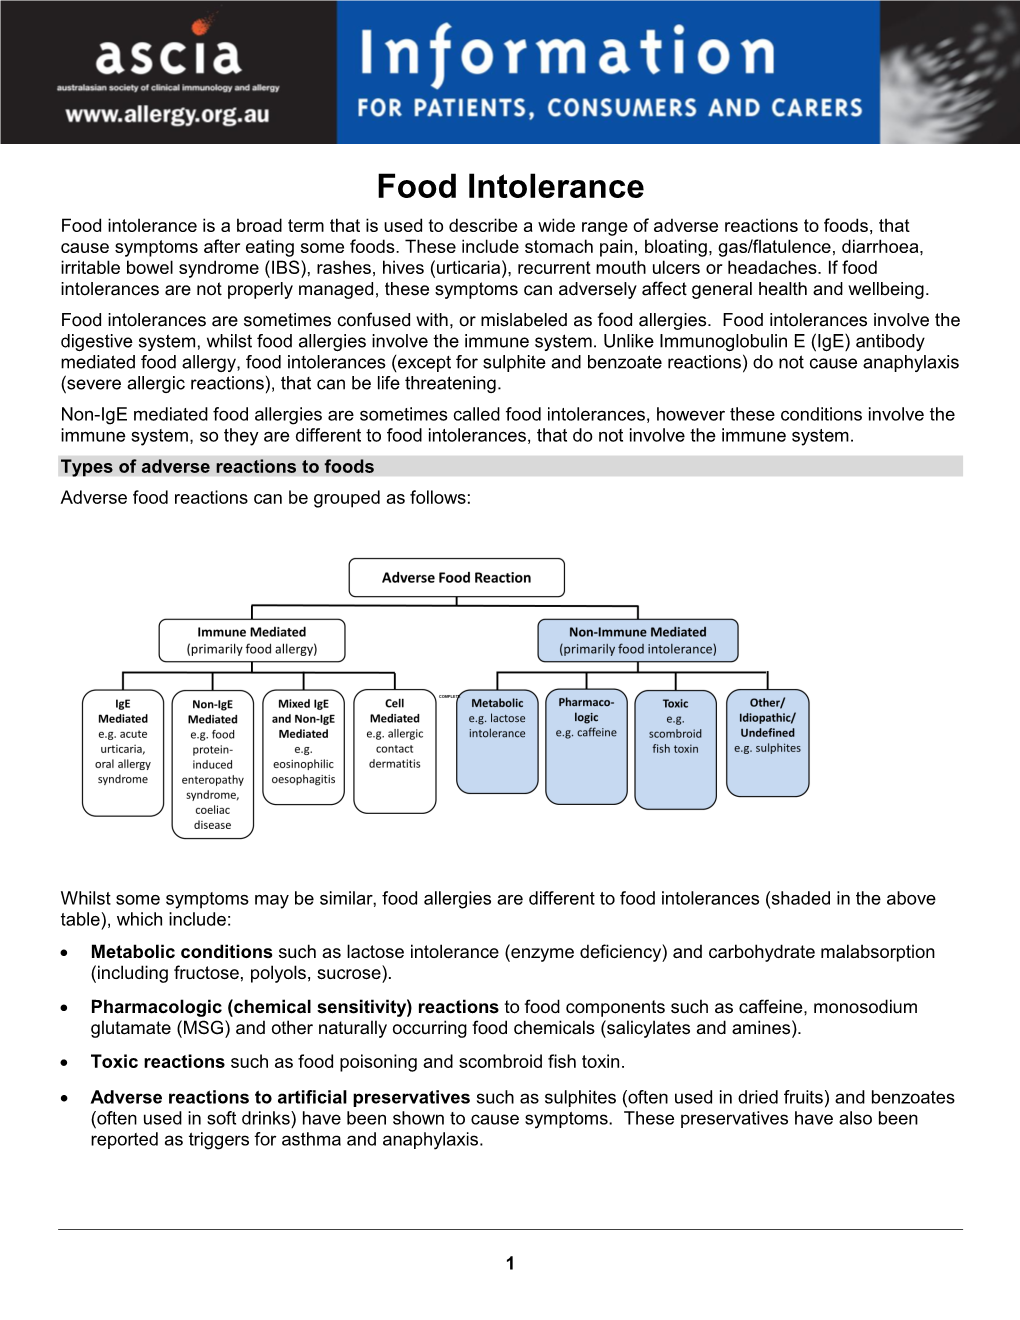 Food Intolerance Food Intolerance Is a Broad Term That Is Used to Describe a Wide Range of Adverse Reactions to Foods, That Cause Symptoms After Eating Some Foods